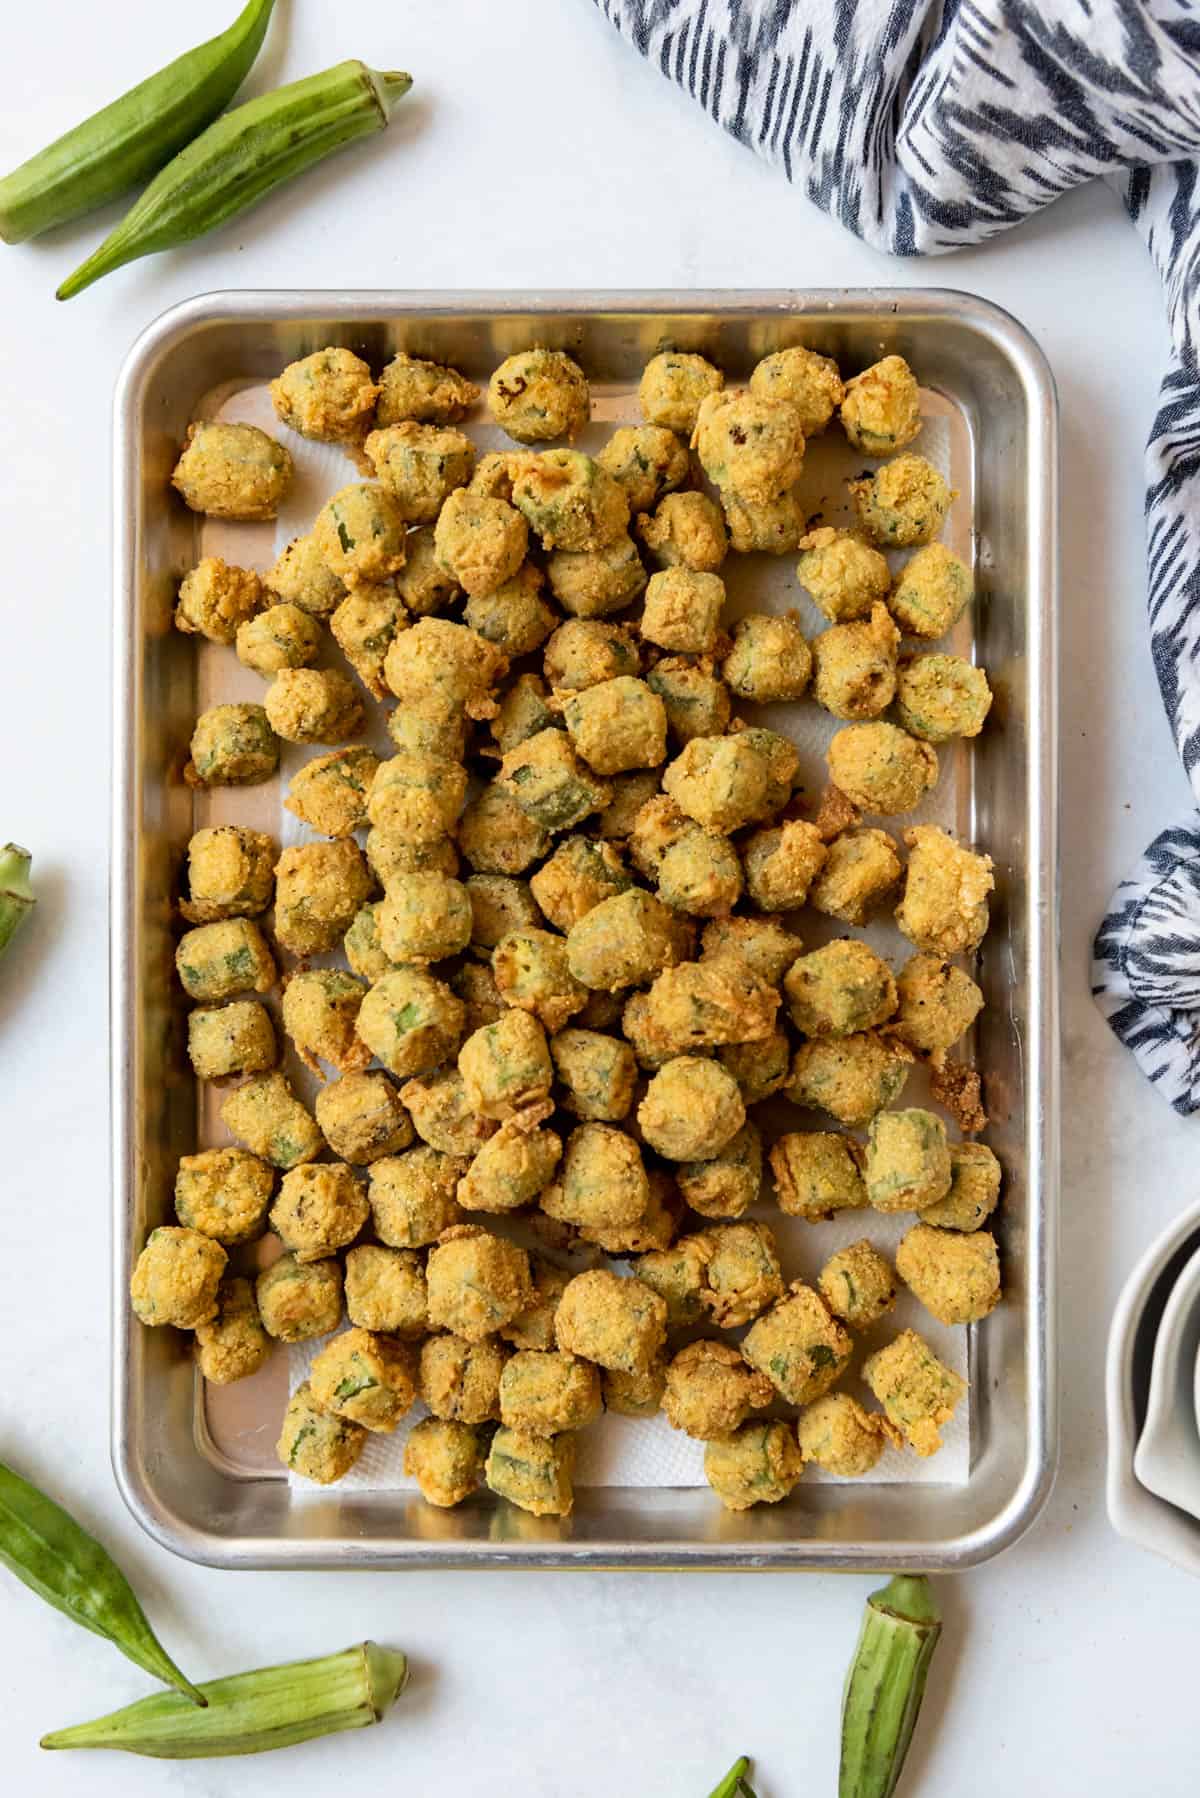 Fried okra on a baking sheet draining onto paper towels.